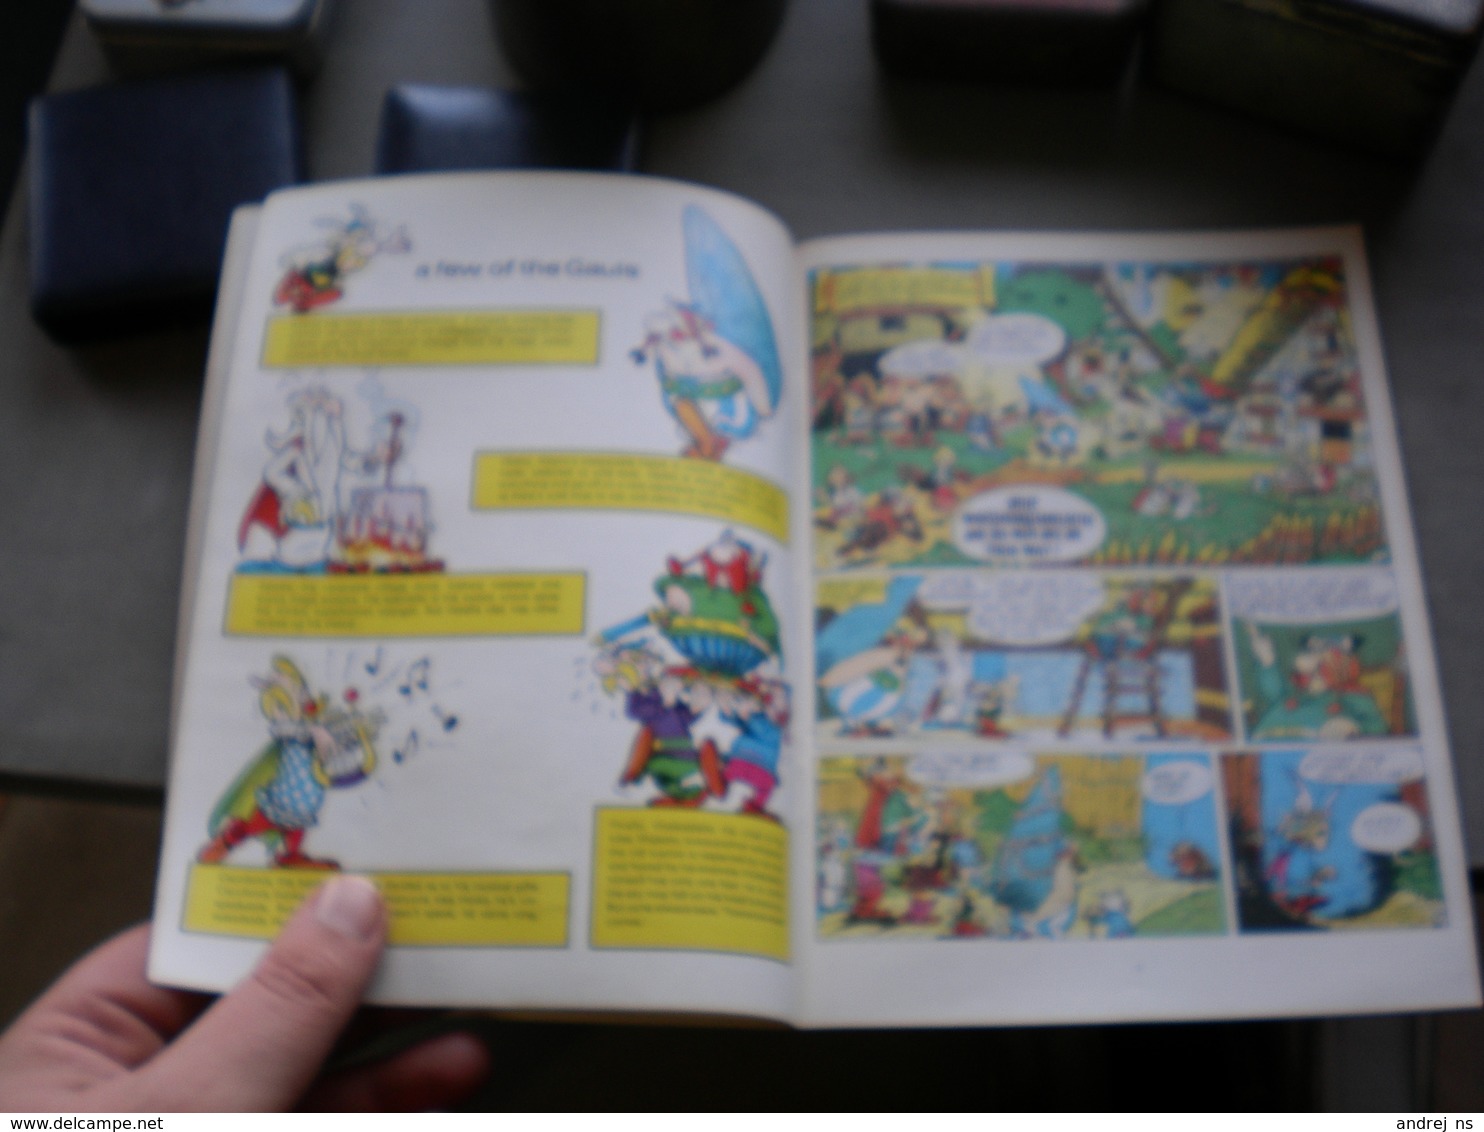 Asterix And The Cauldron Text Goscinny Drawings Uderzo 48 Pages - Translated Comics